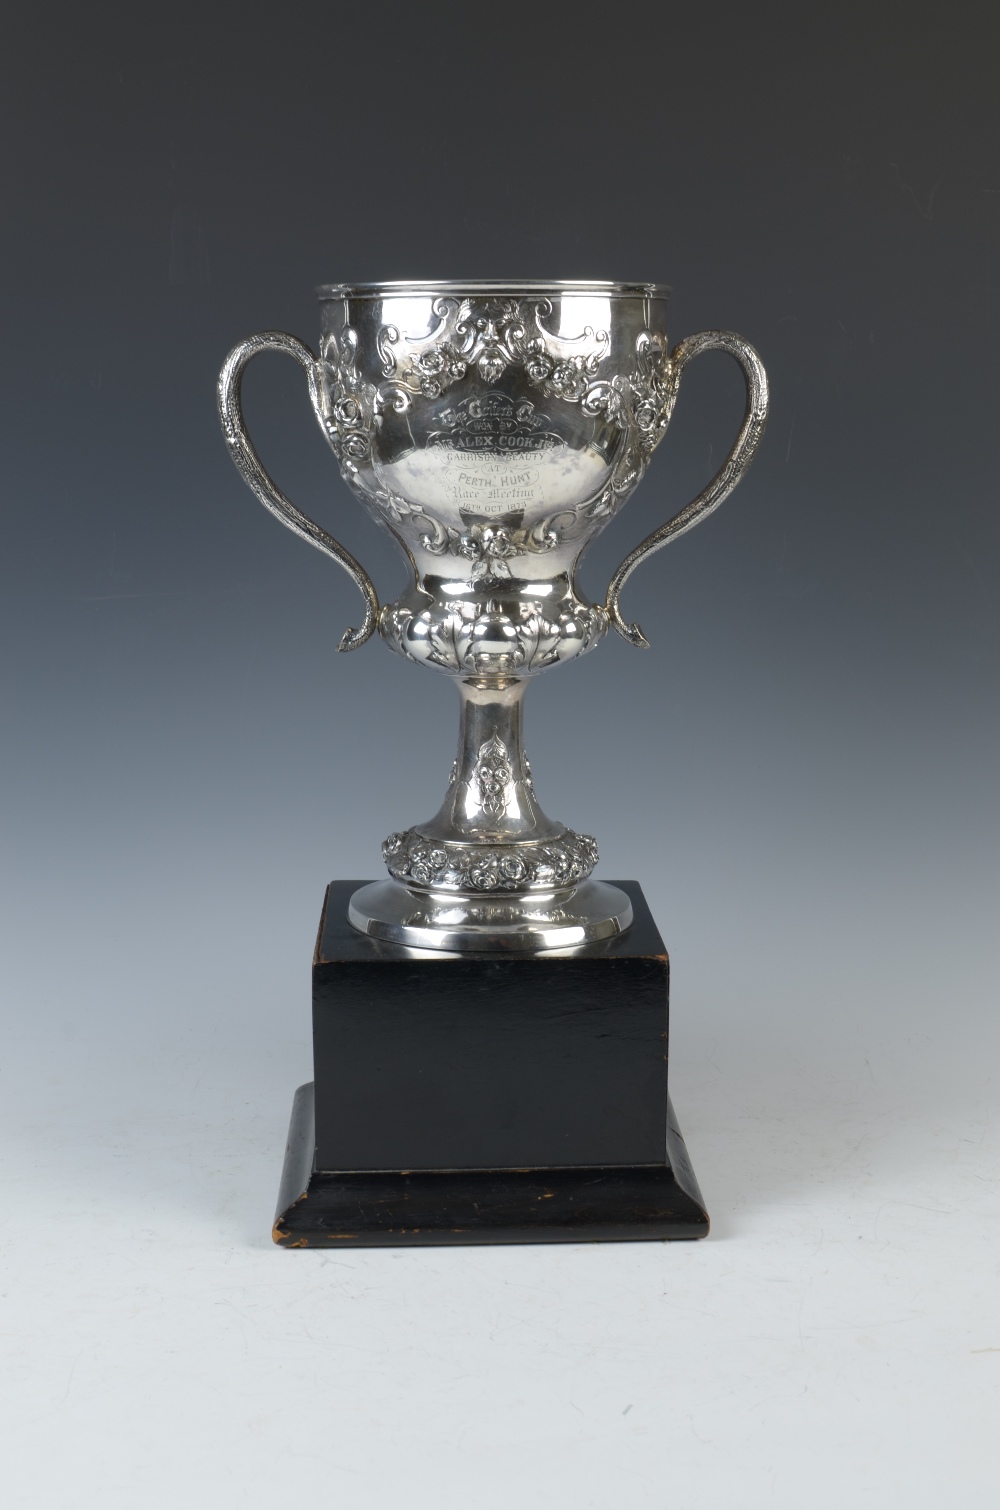 A Victorian silver two-handled Trophy finely embossed battle scene, inscribed "The Golfers Trophy